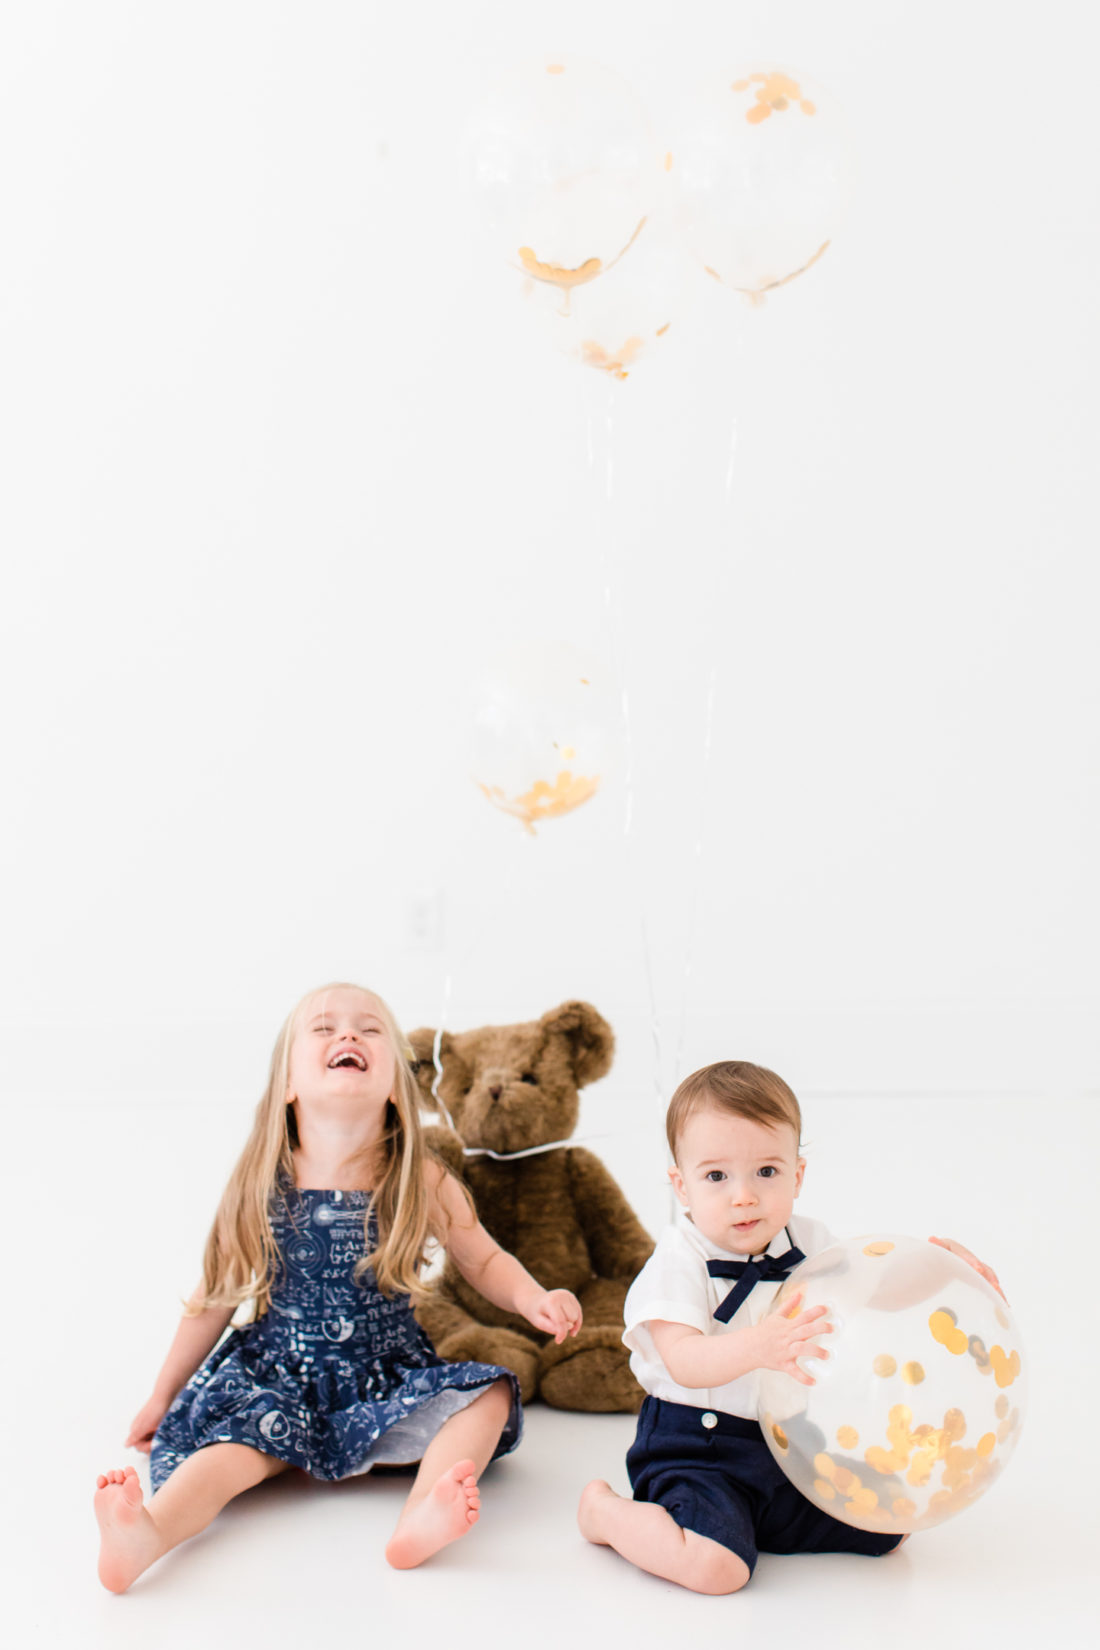 Marlowe and Major Martino play with balloons during the portraits for Major's first birthday